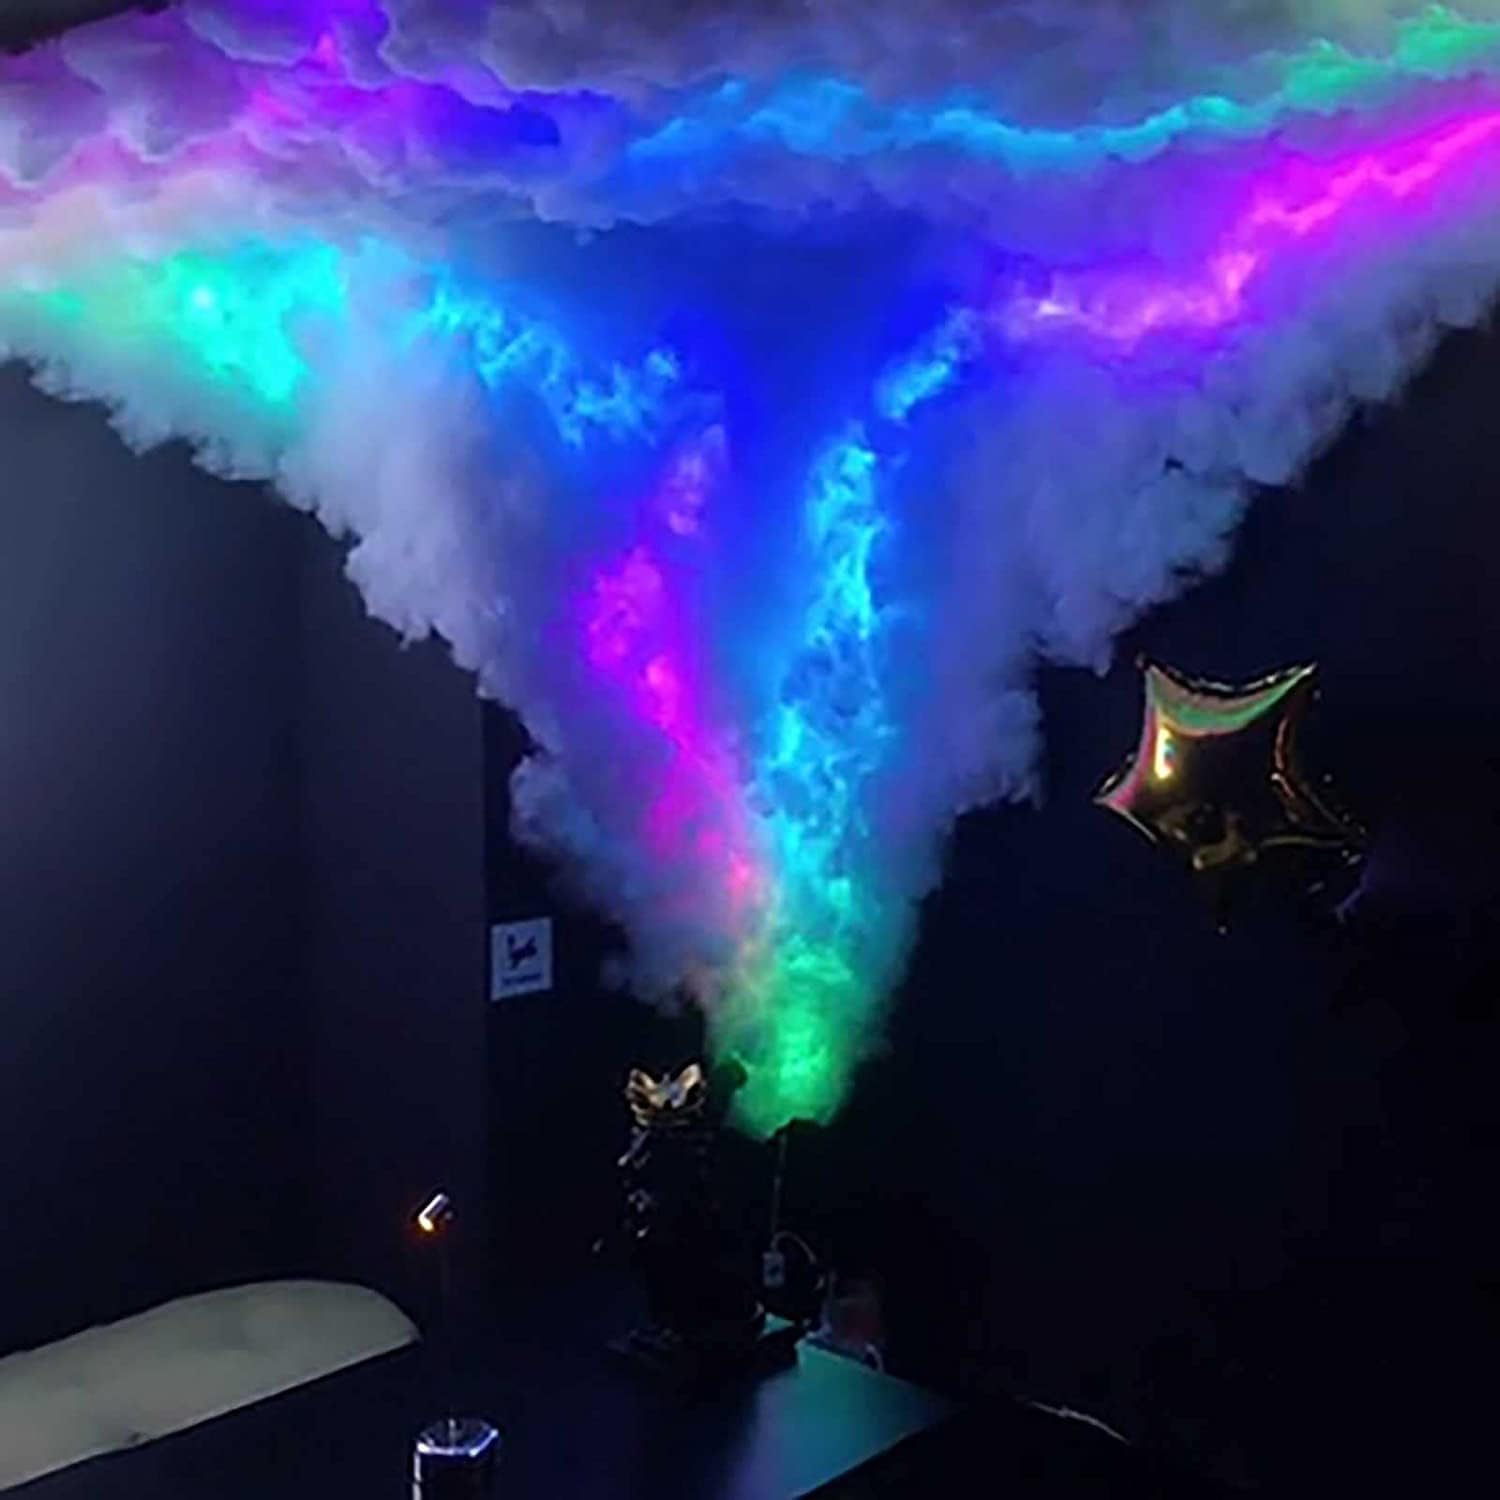 Cloud Lights for Ceiling, Cloud Led Lights, 3D Cotton Cloud Lights, Fluffy Ceiling Cloud Night Lamp, Led Clouds Christmas Halloween Decoration, for Gaming Room, Bar, Party, Bedroom (10M)